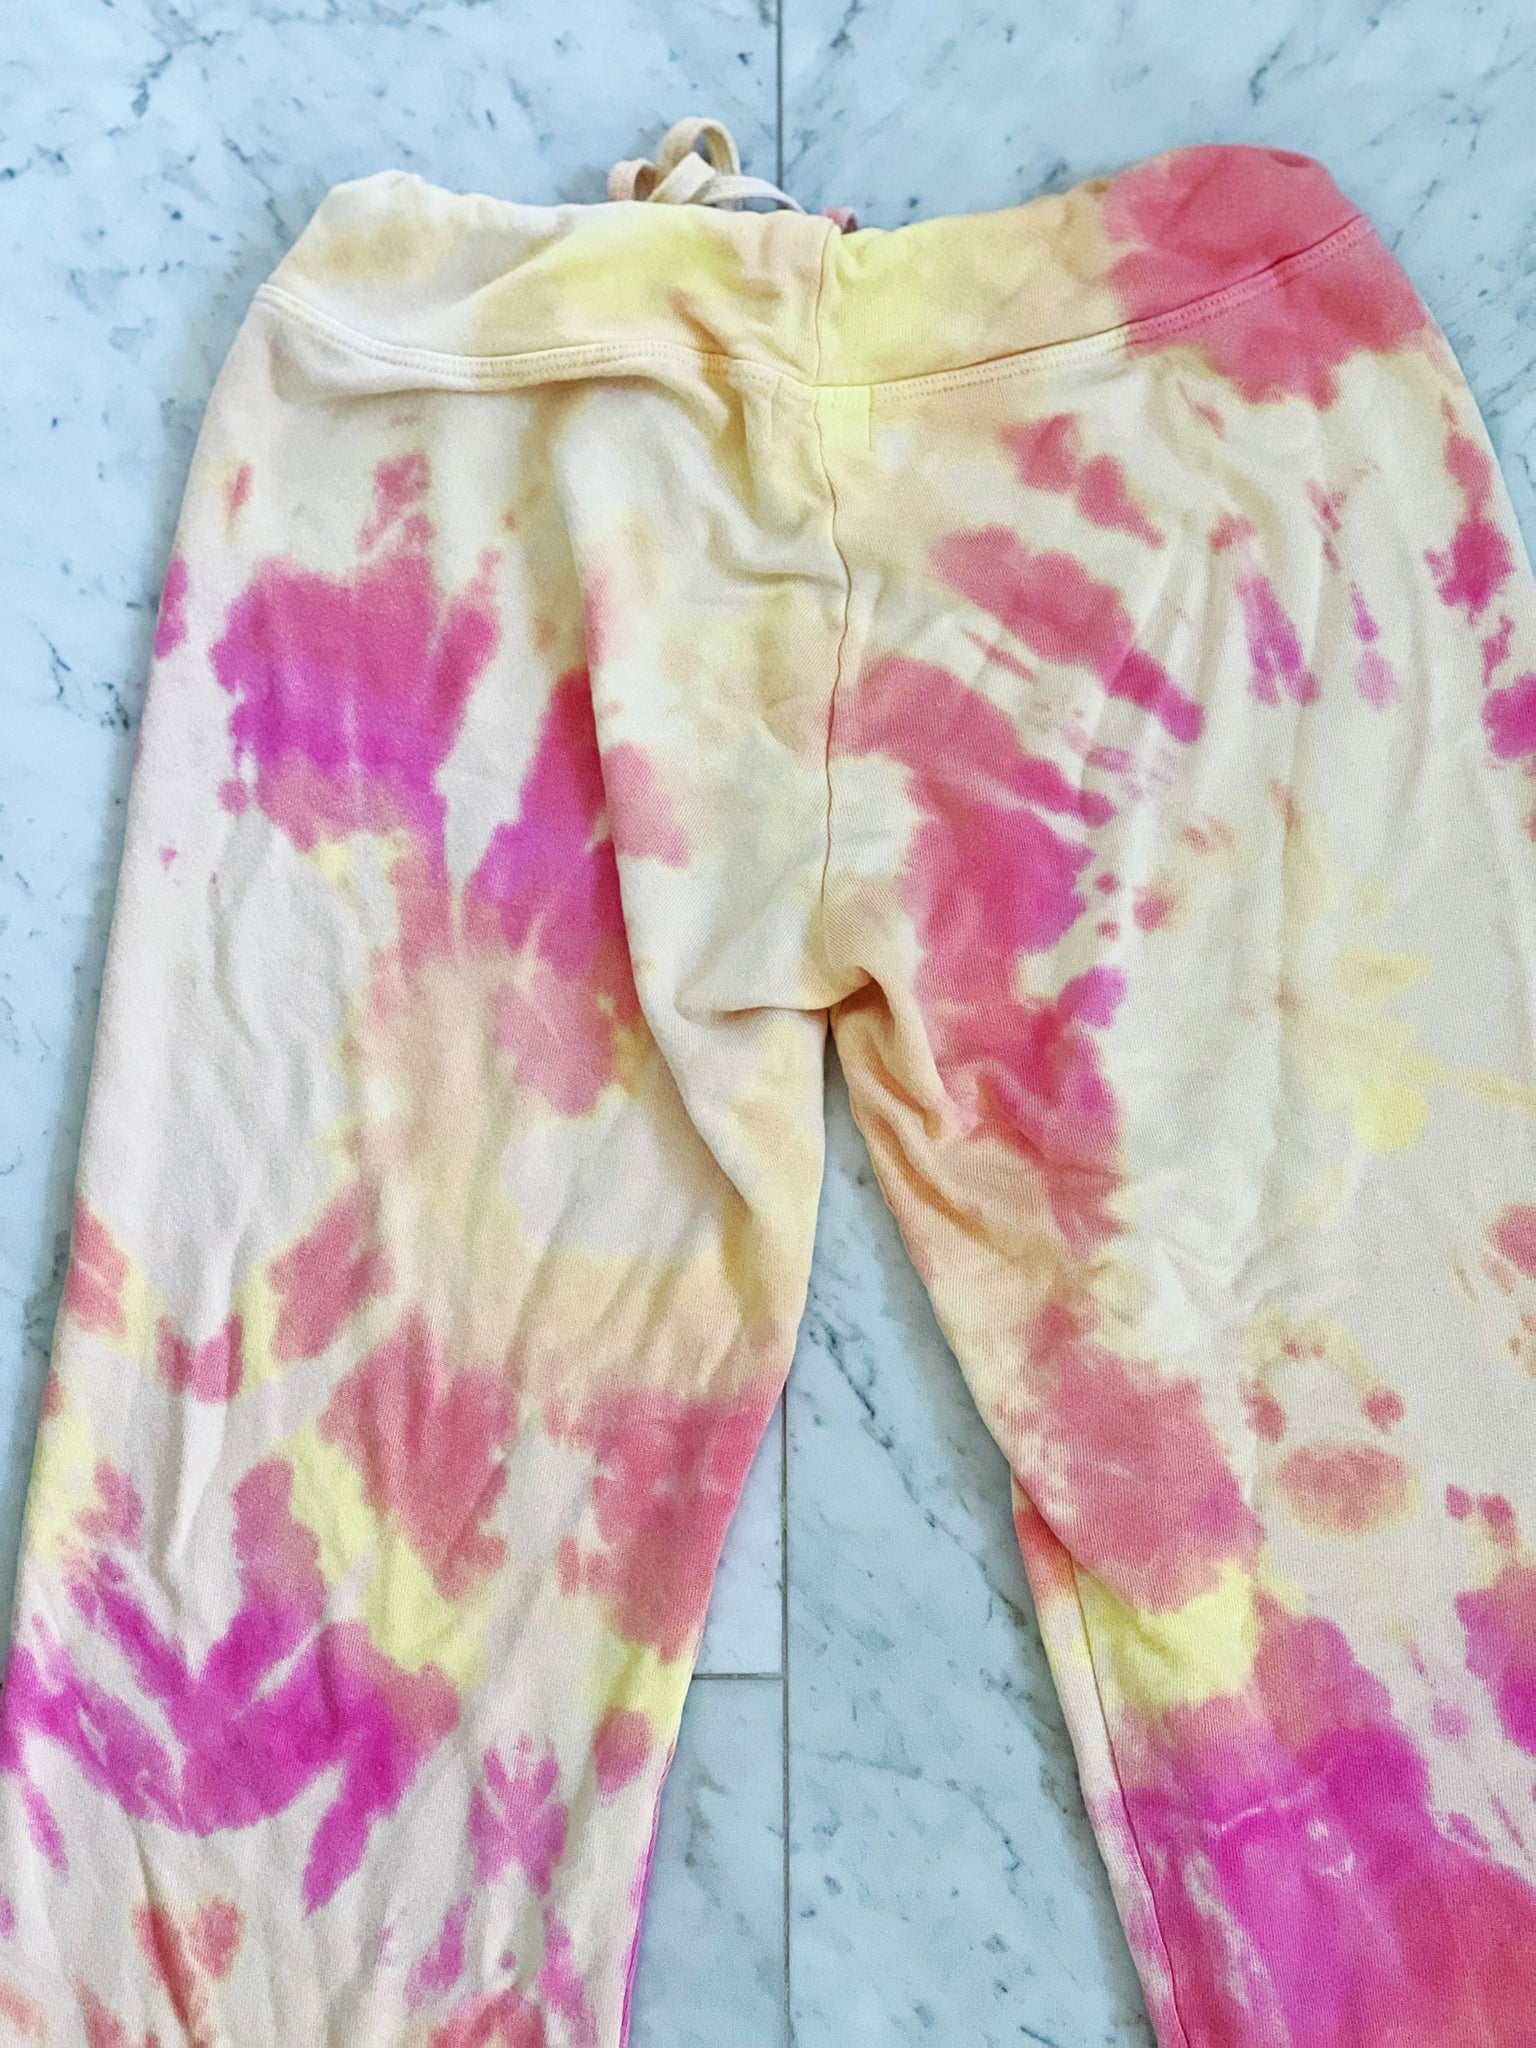 Hand dyed ultra soft sweatpants in a sunset inspired color palette